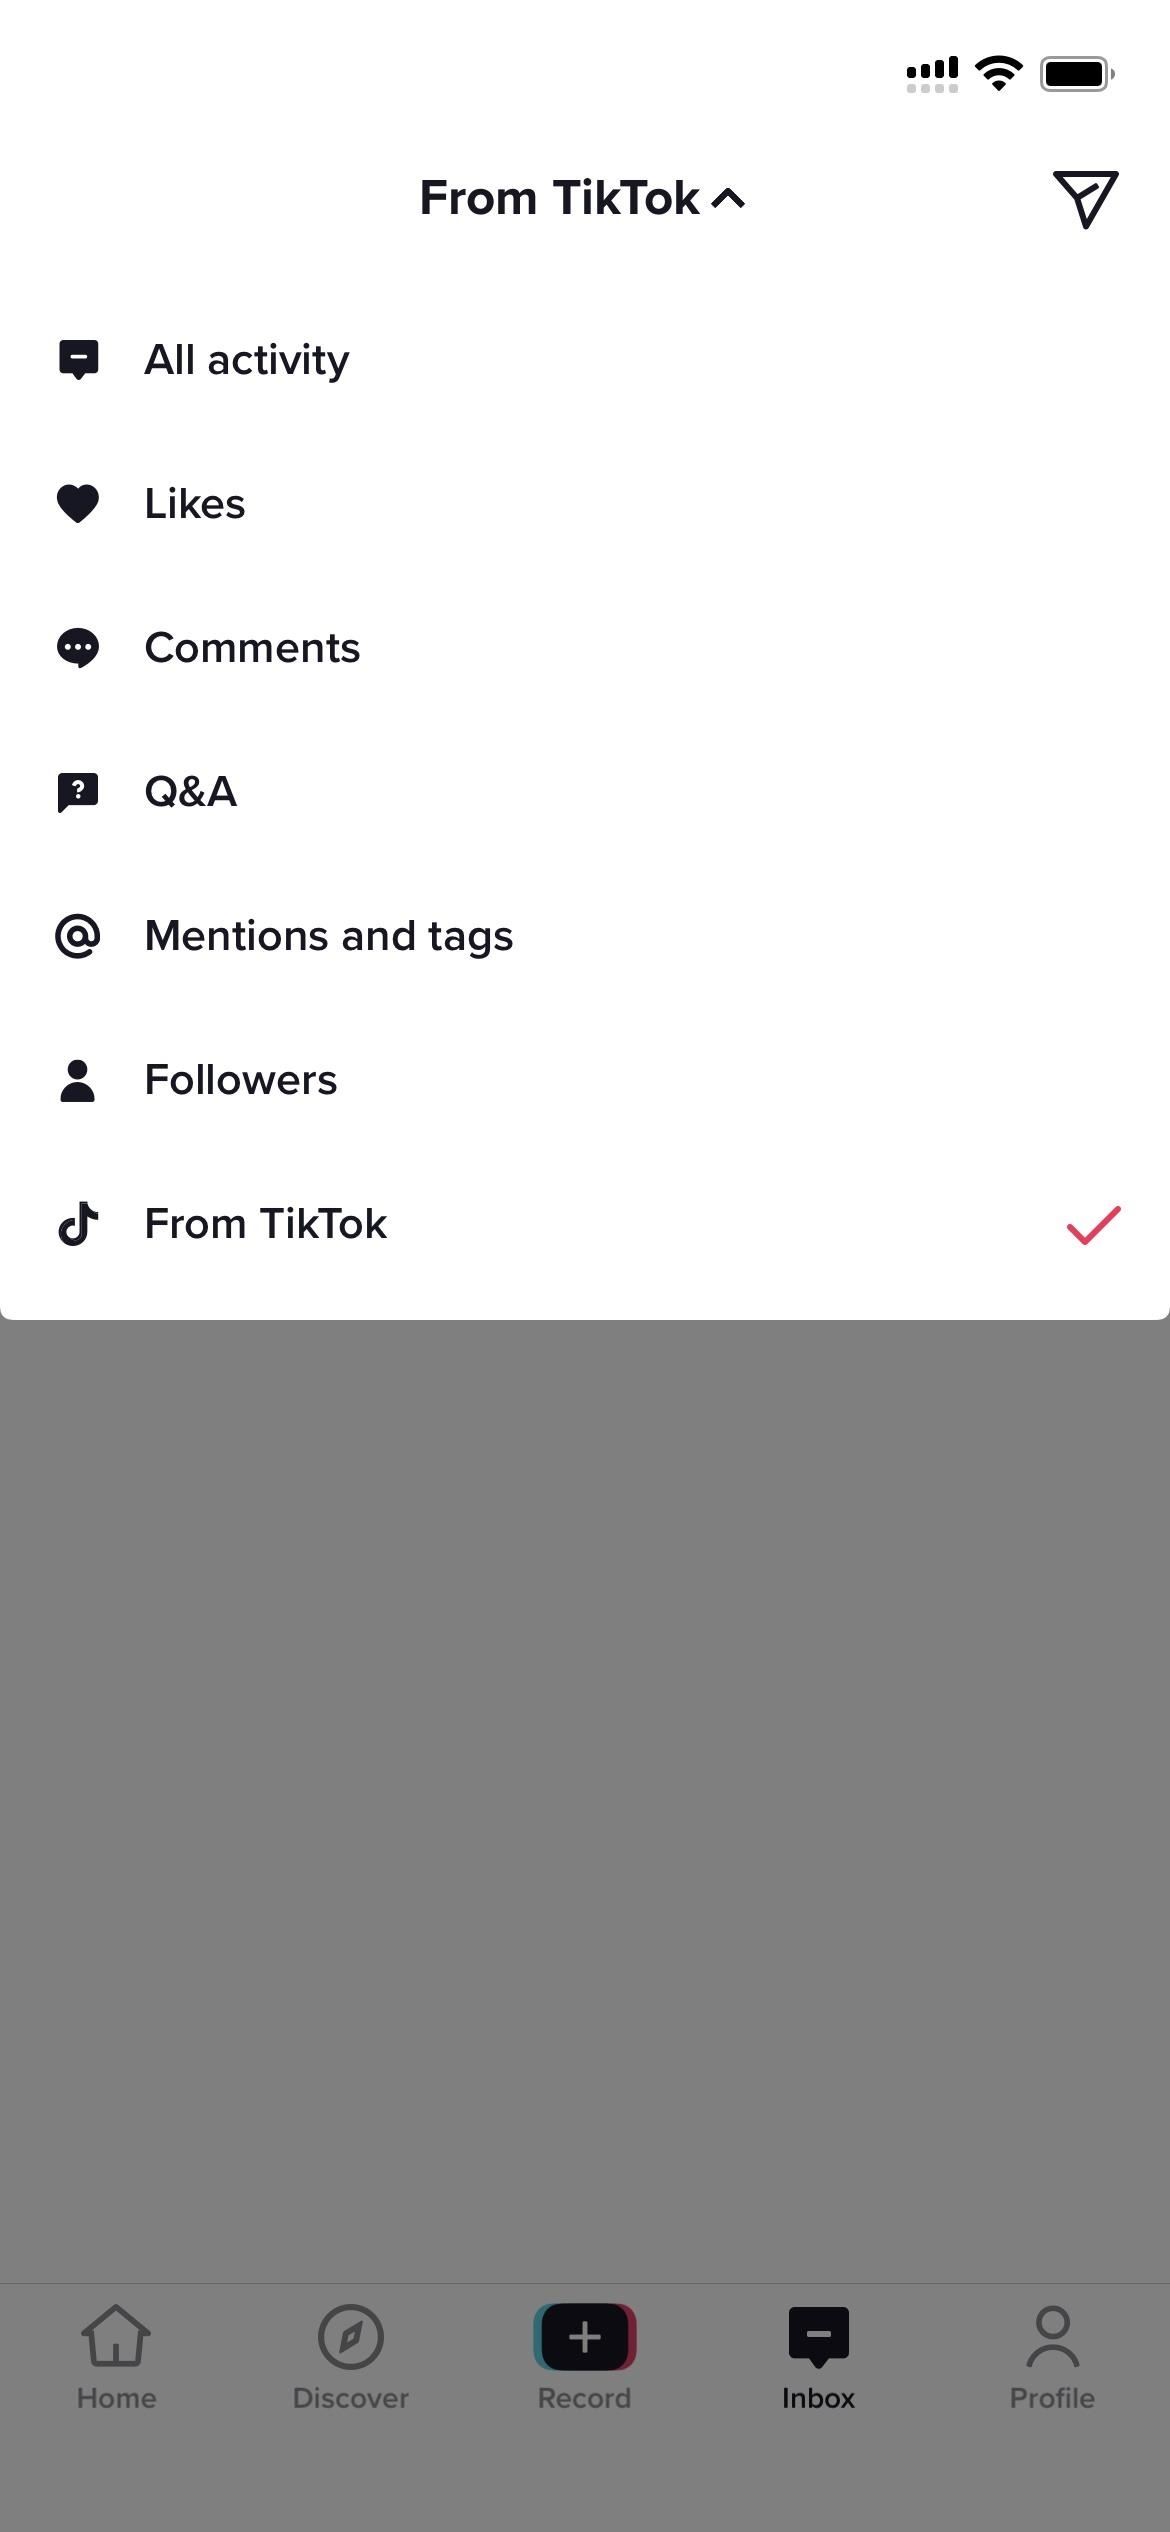 How to Record 10-Minute Videos on TikTok Using Your iPhone or Android Phone